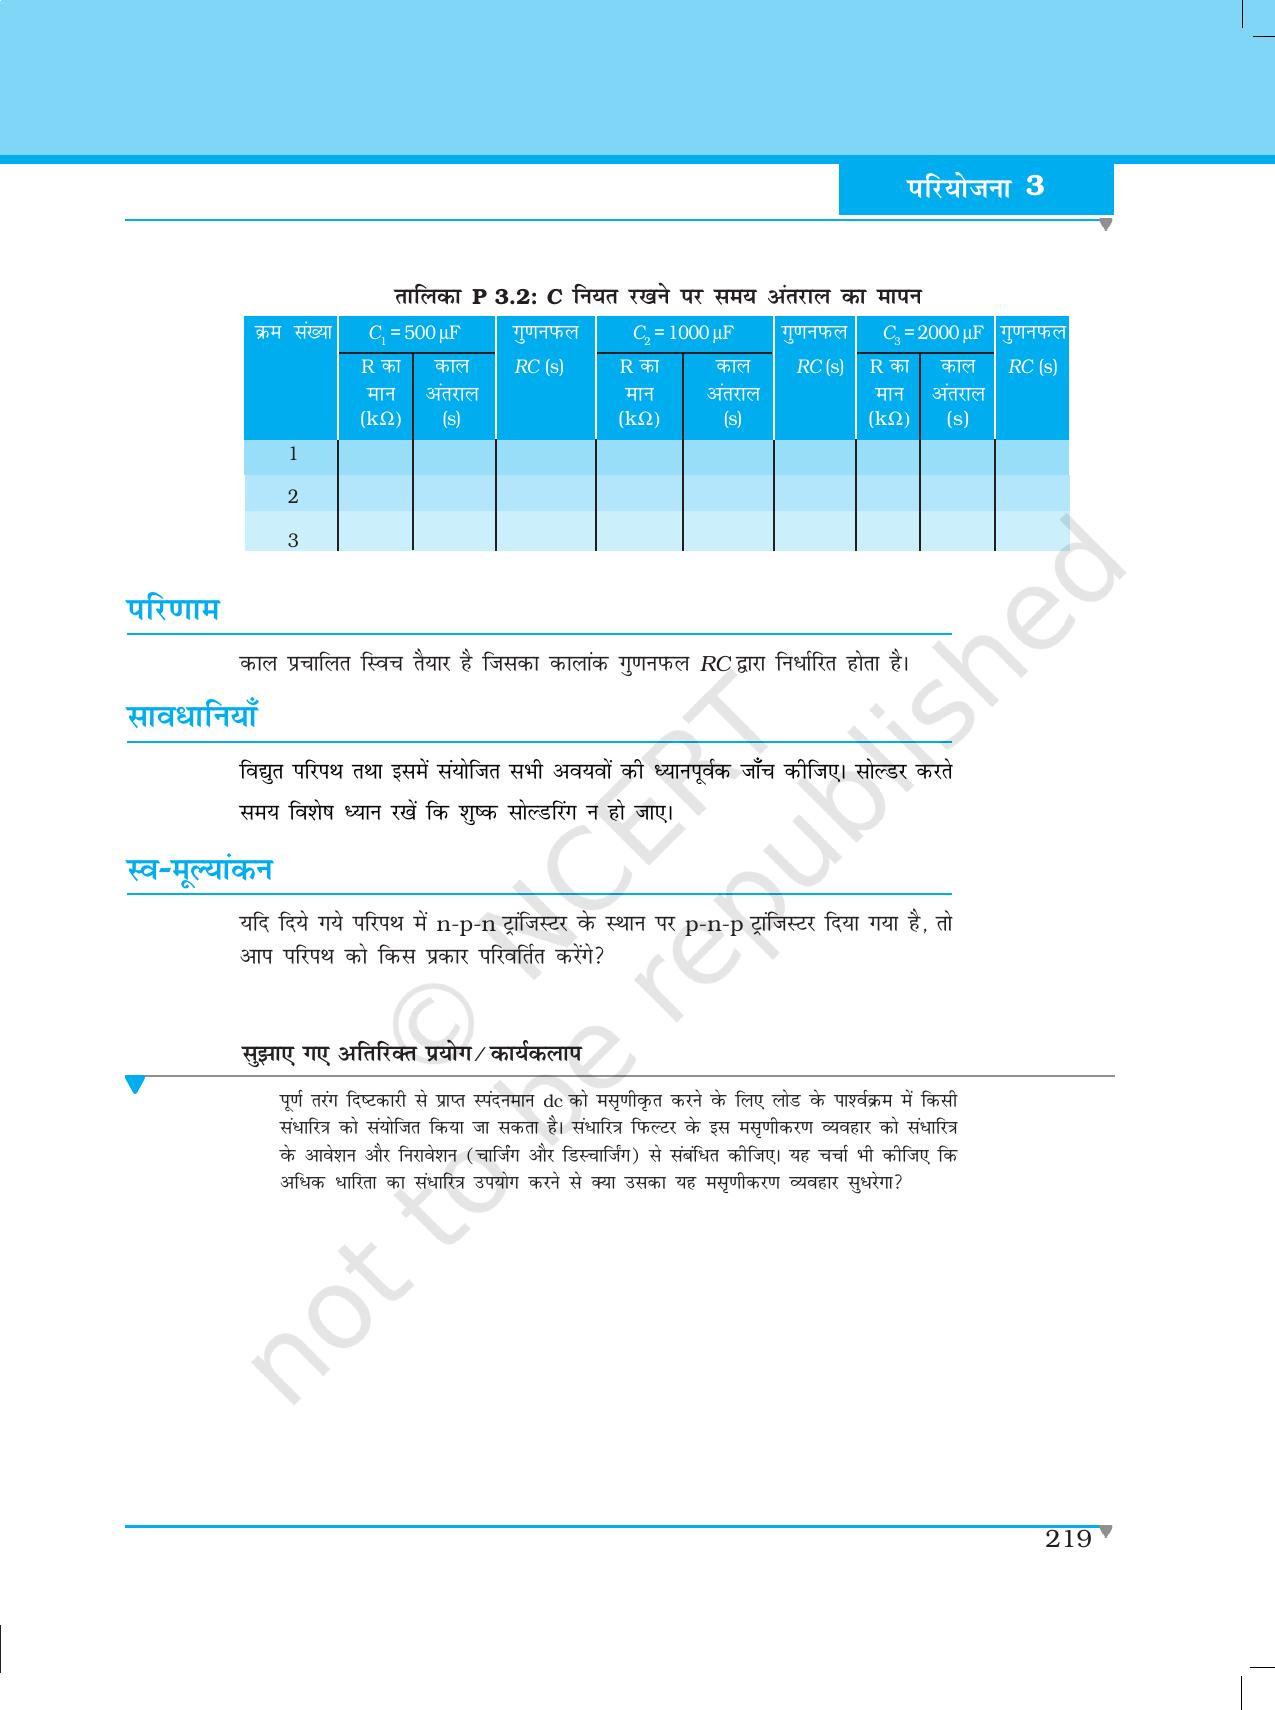 NCERT Laboratory Manuals for Class XII भौतिकी - परियोजना (1 - 7) - Page 13